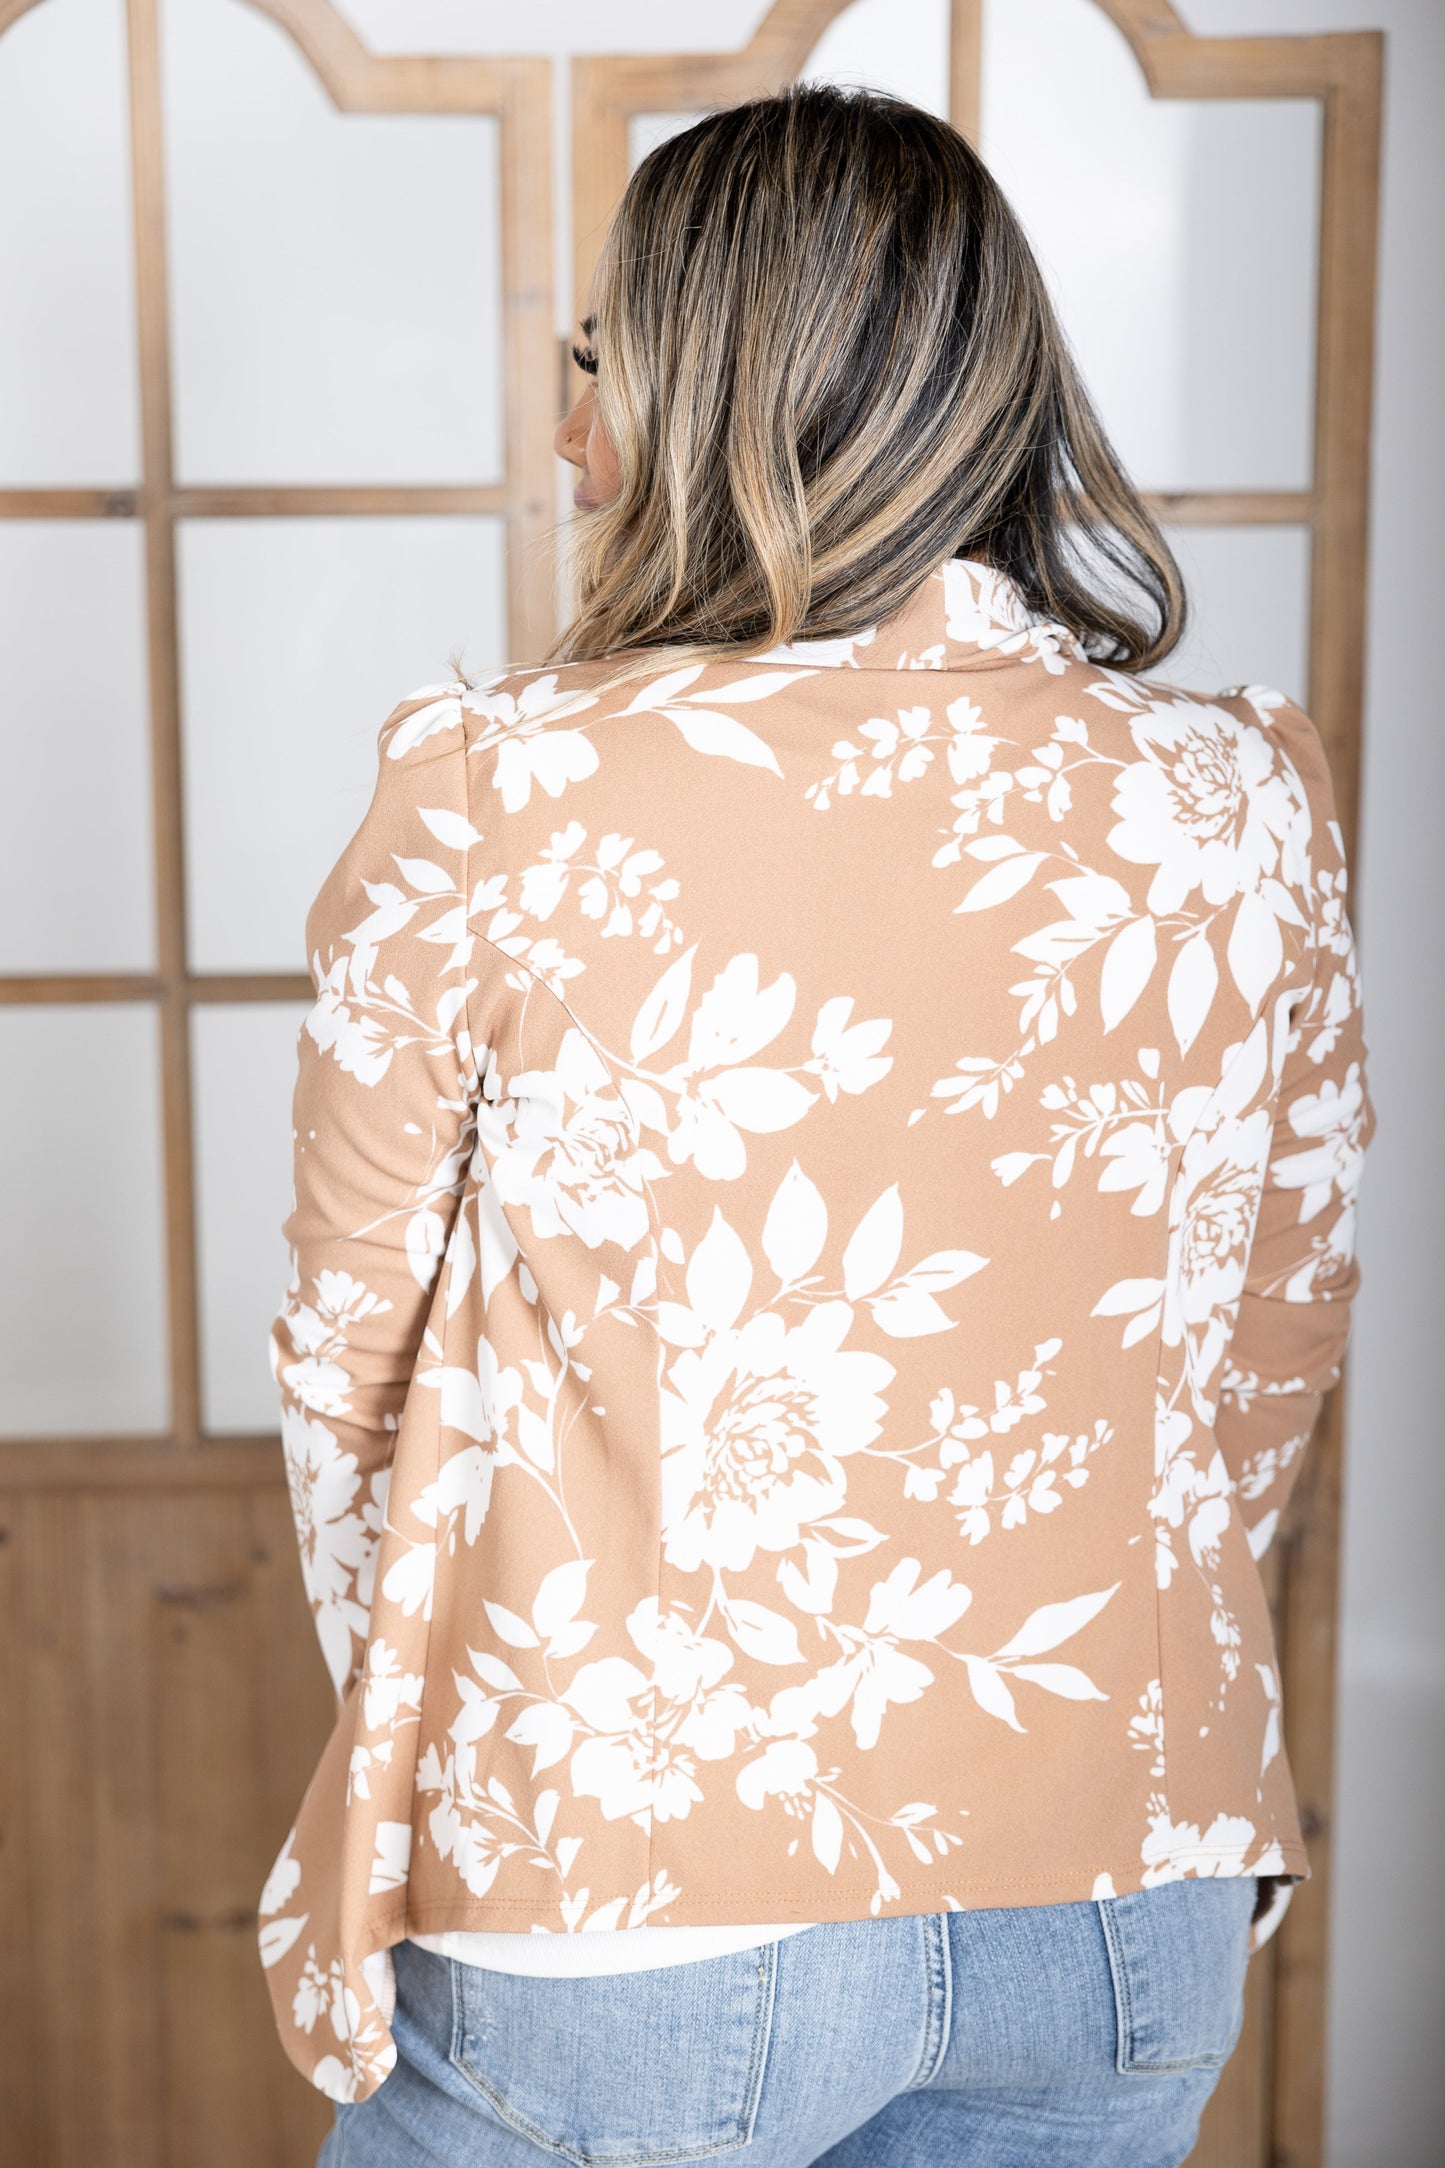 BLAZER OF GLORY IN GOLDEN FLORAL